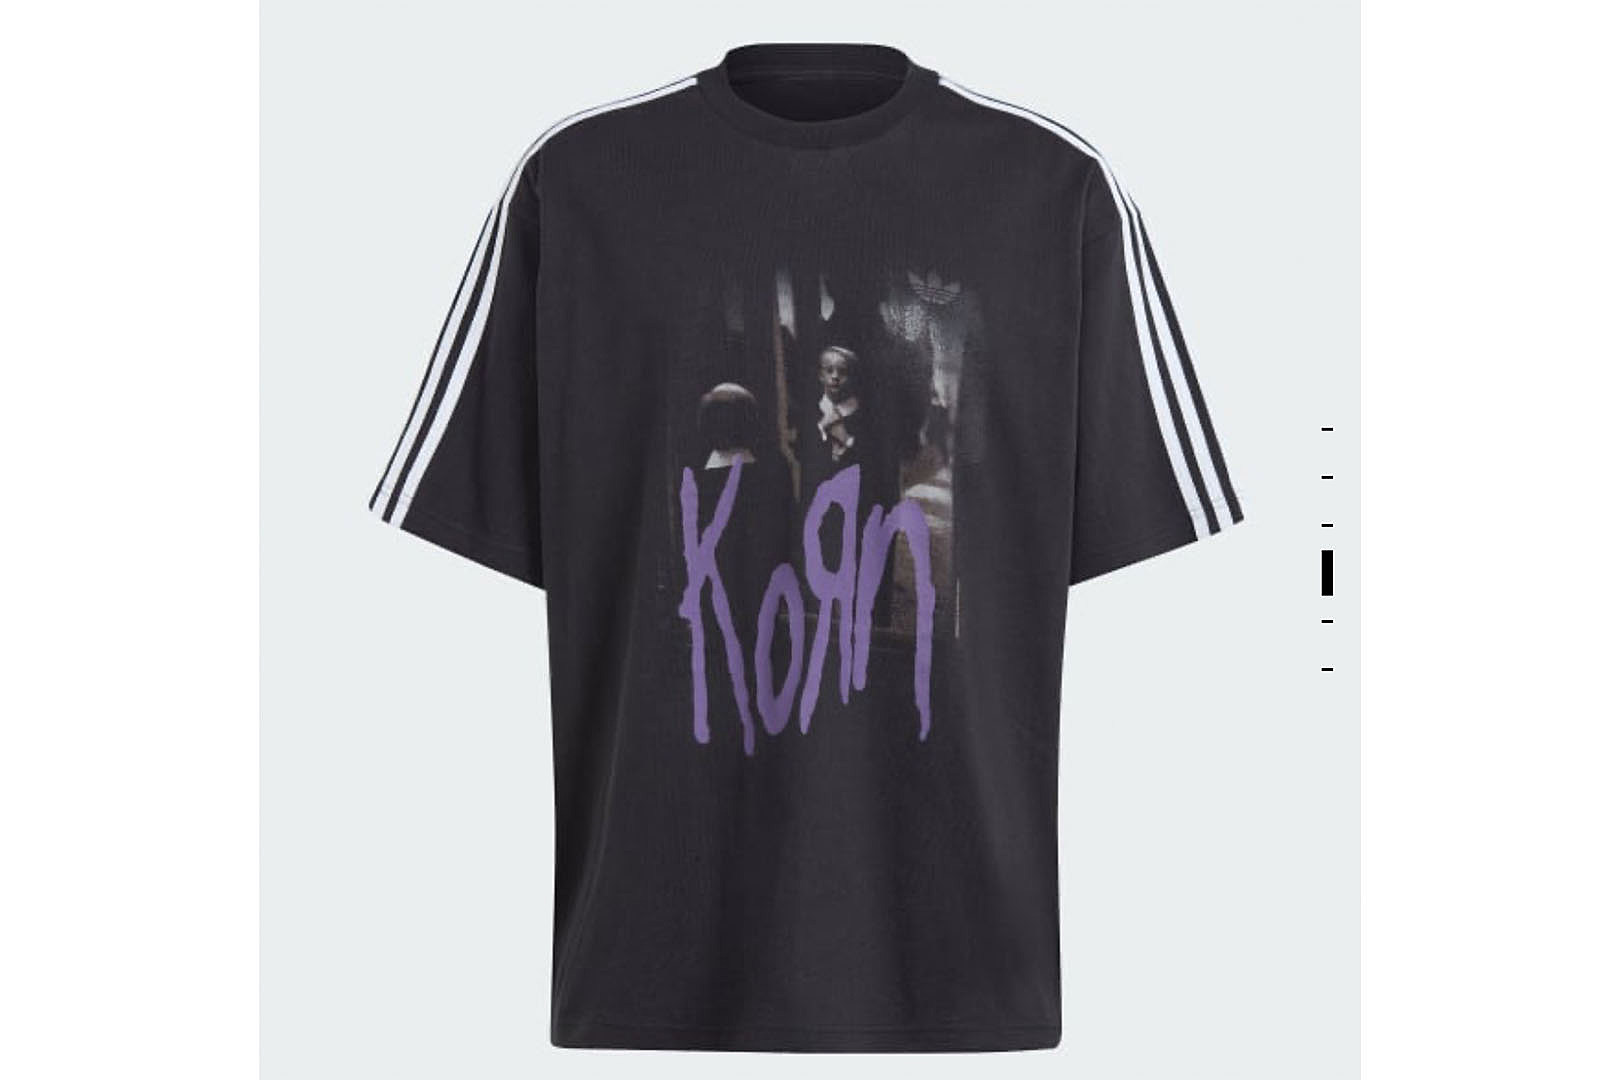 See Korn's Full Upcoming Adidas Collection + How to Buy It